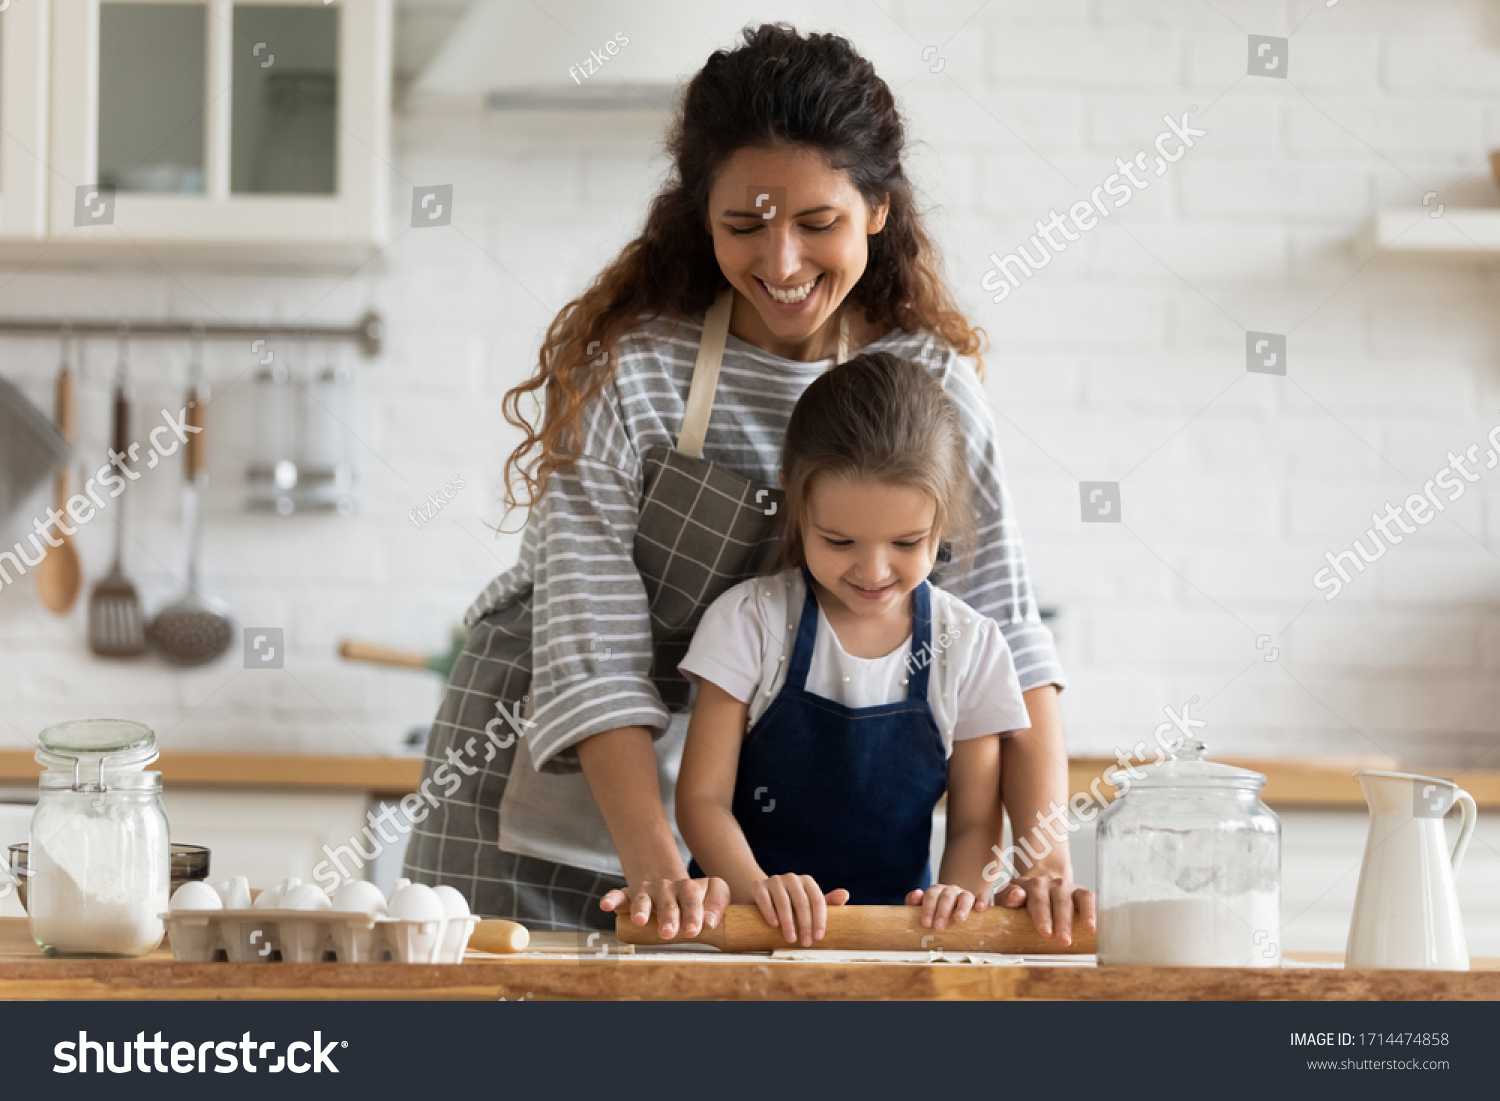 Happy attractive mommy helping cute smiling little preschool child daughter rolling dough for homemade pastry. Excited two female generations family enjoying cooking process together in kitchen. #1714474858